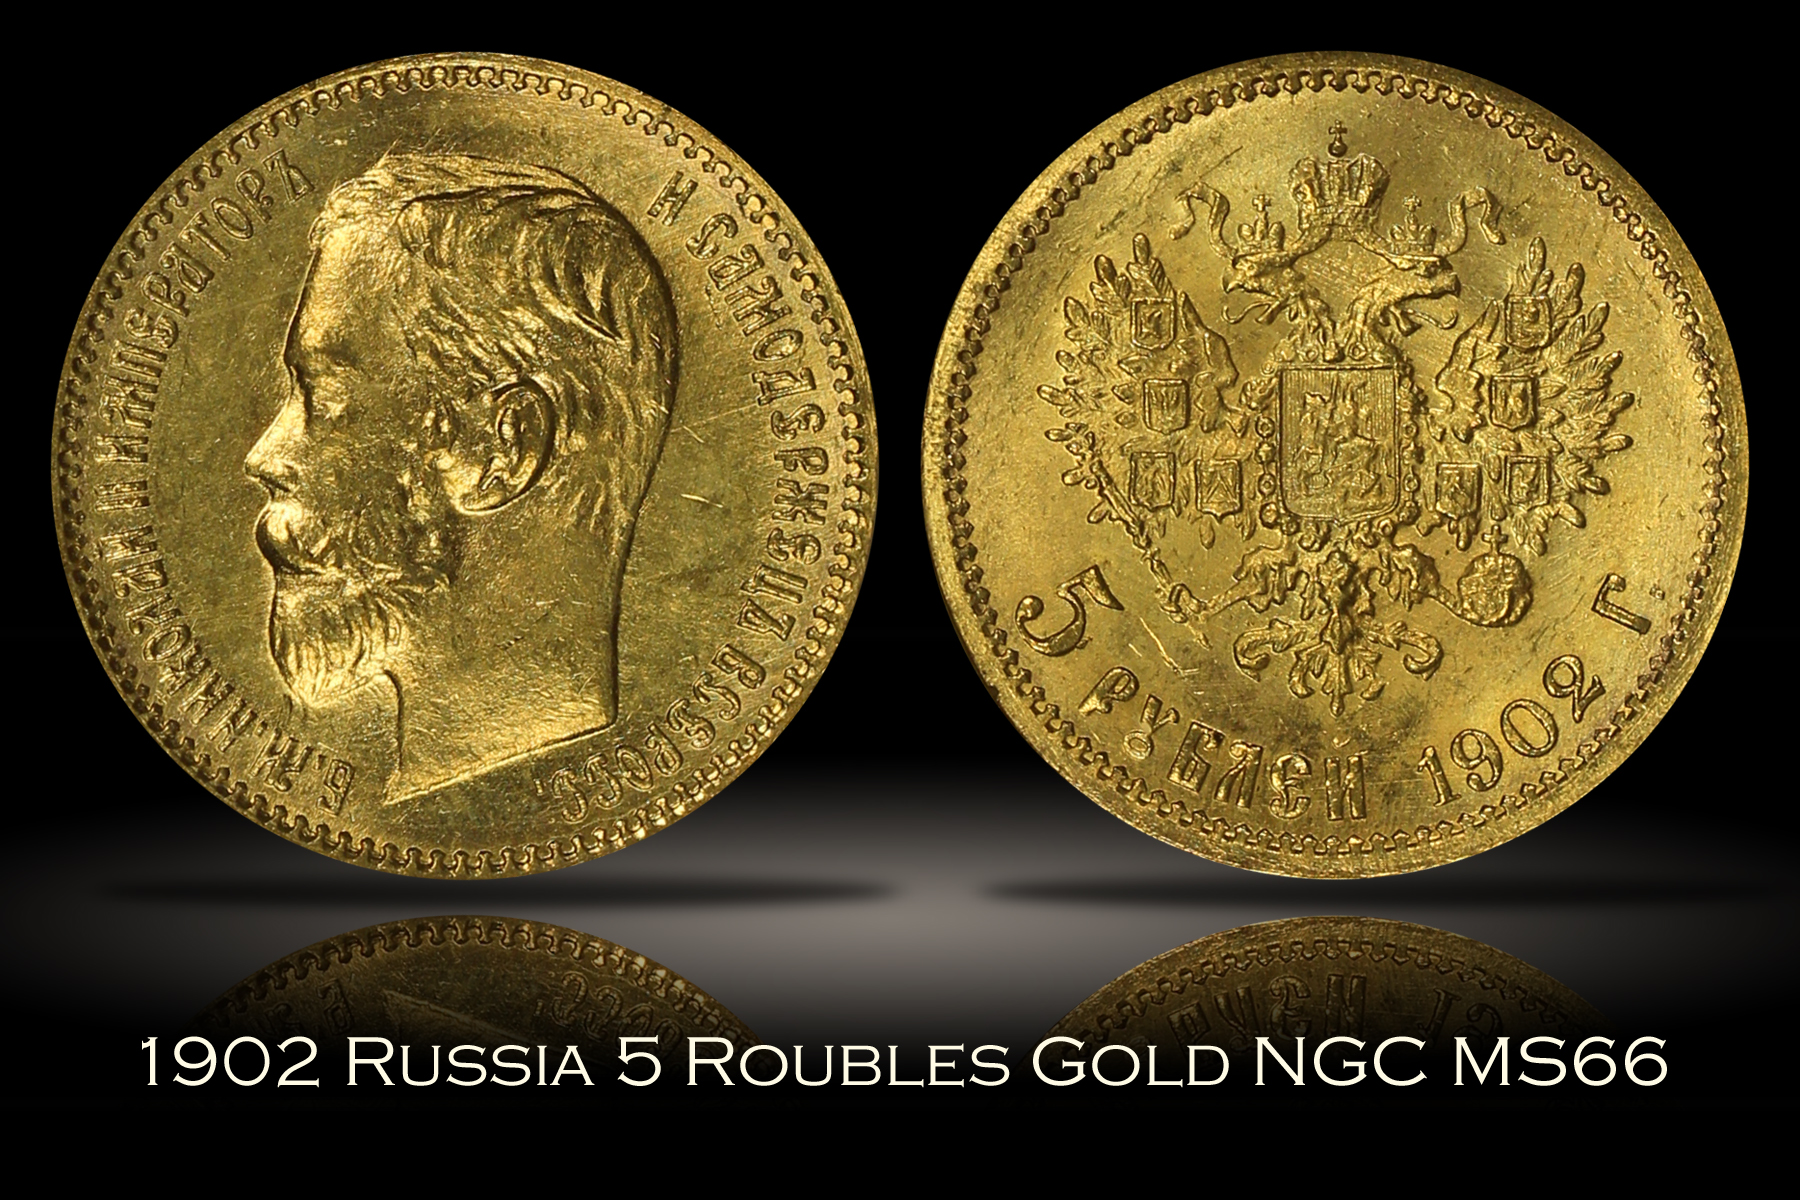 1902 Russia 5 Roubles Gold NGC MS66